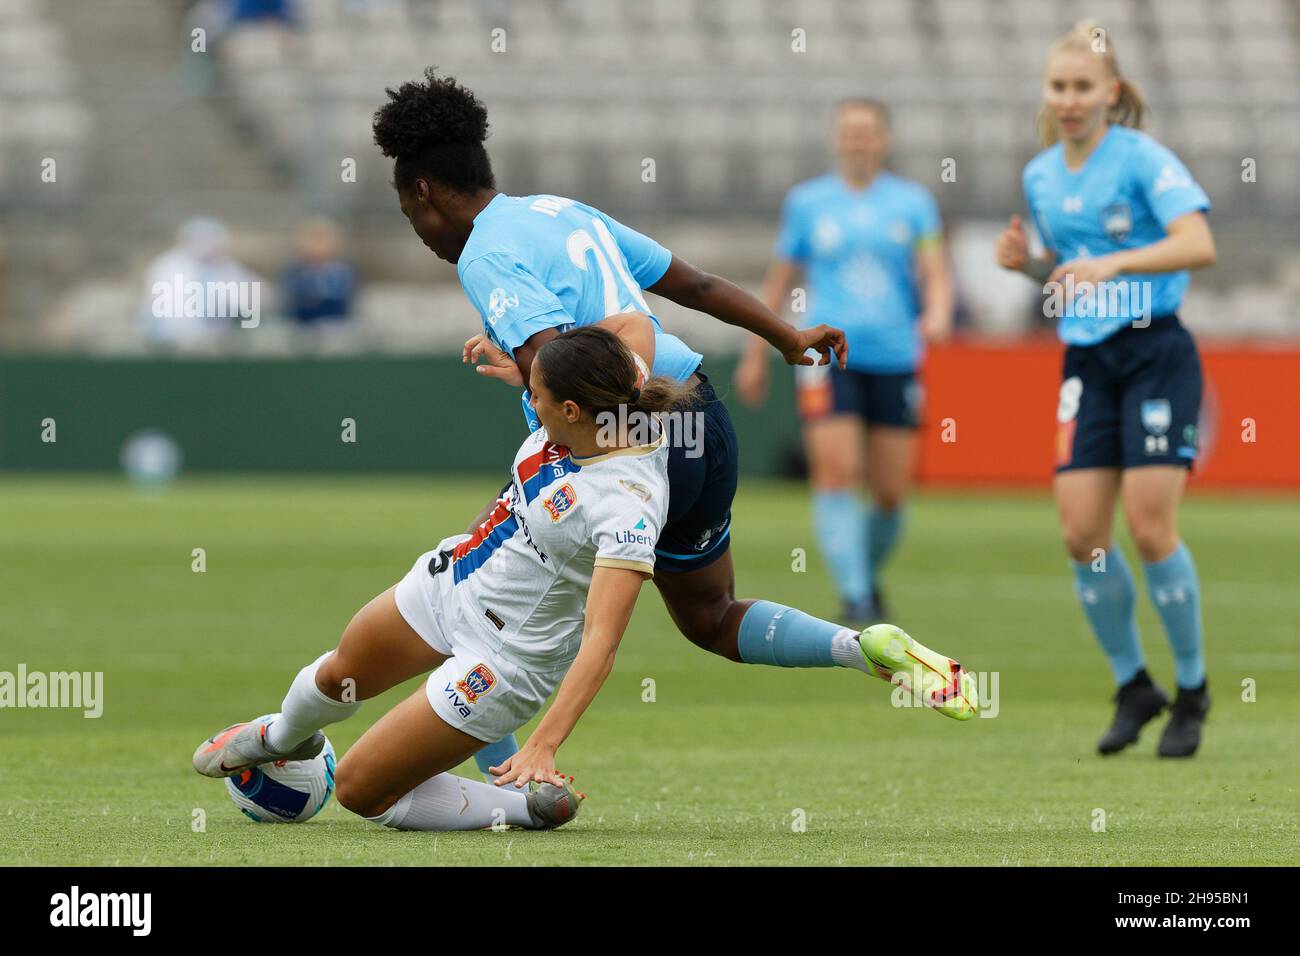 Tiana Jaber of the Newcastle Jets challenges Princess Ibini-Isei of Sydney FC during the A-League soccer match between Sydney FC and Newcastle Jets on December 4, 2021 at Netstrata Jubilee Stadium in Sydney, Australia Stock Photo